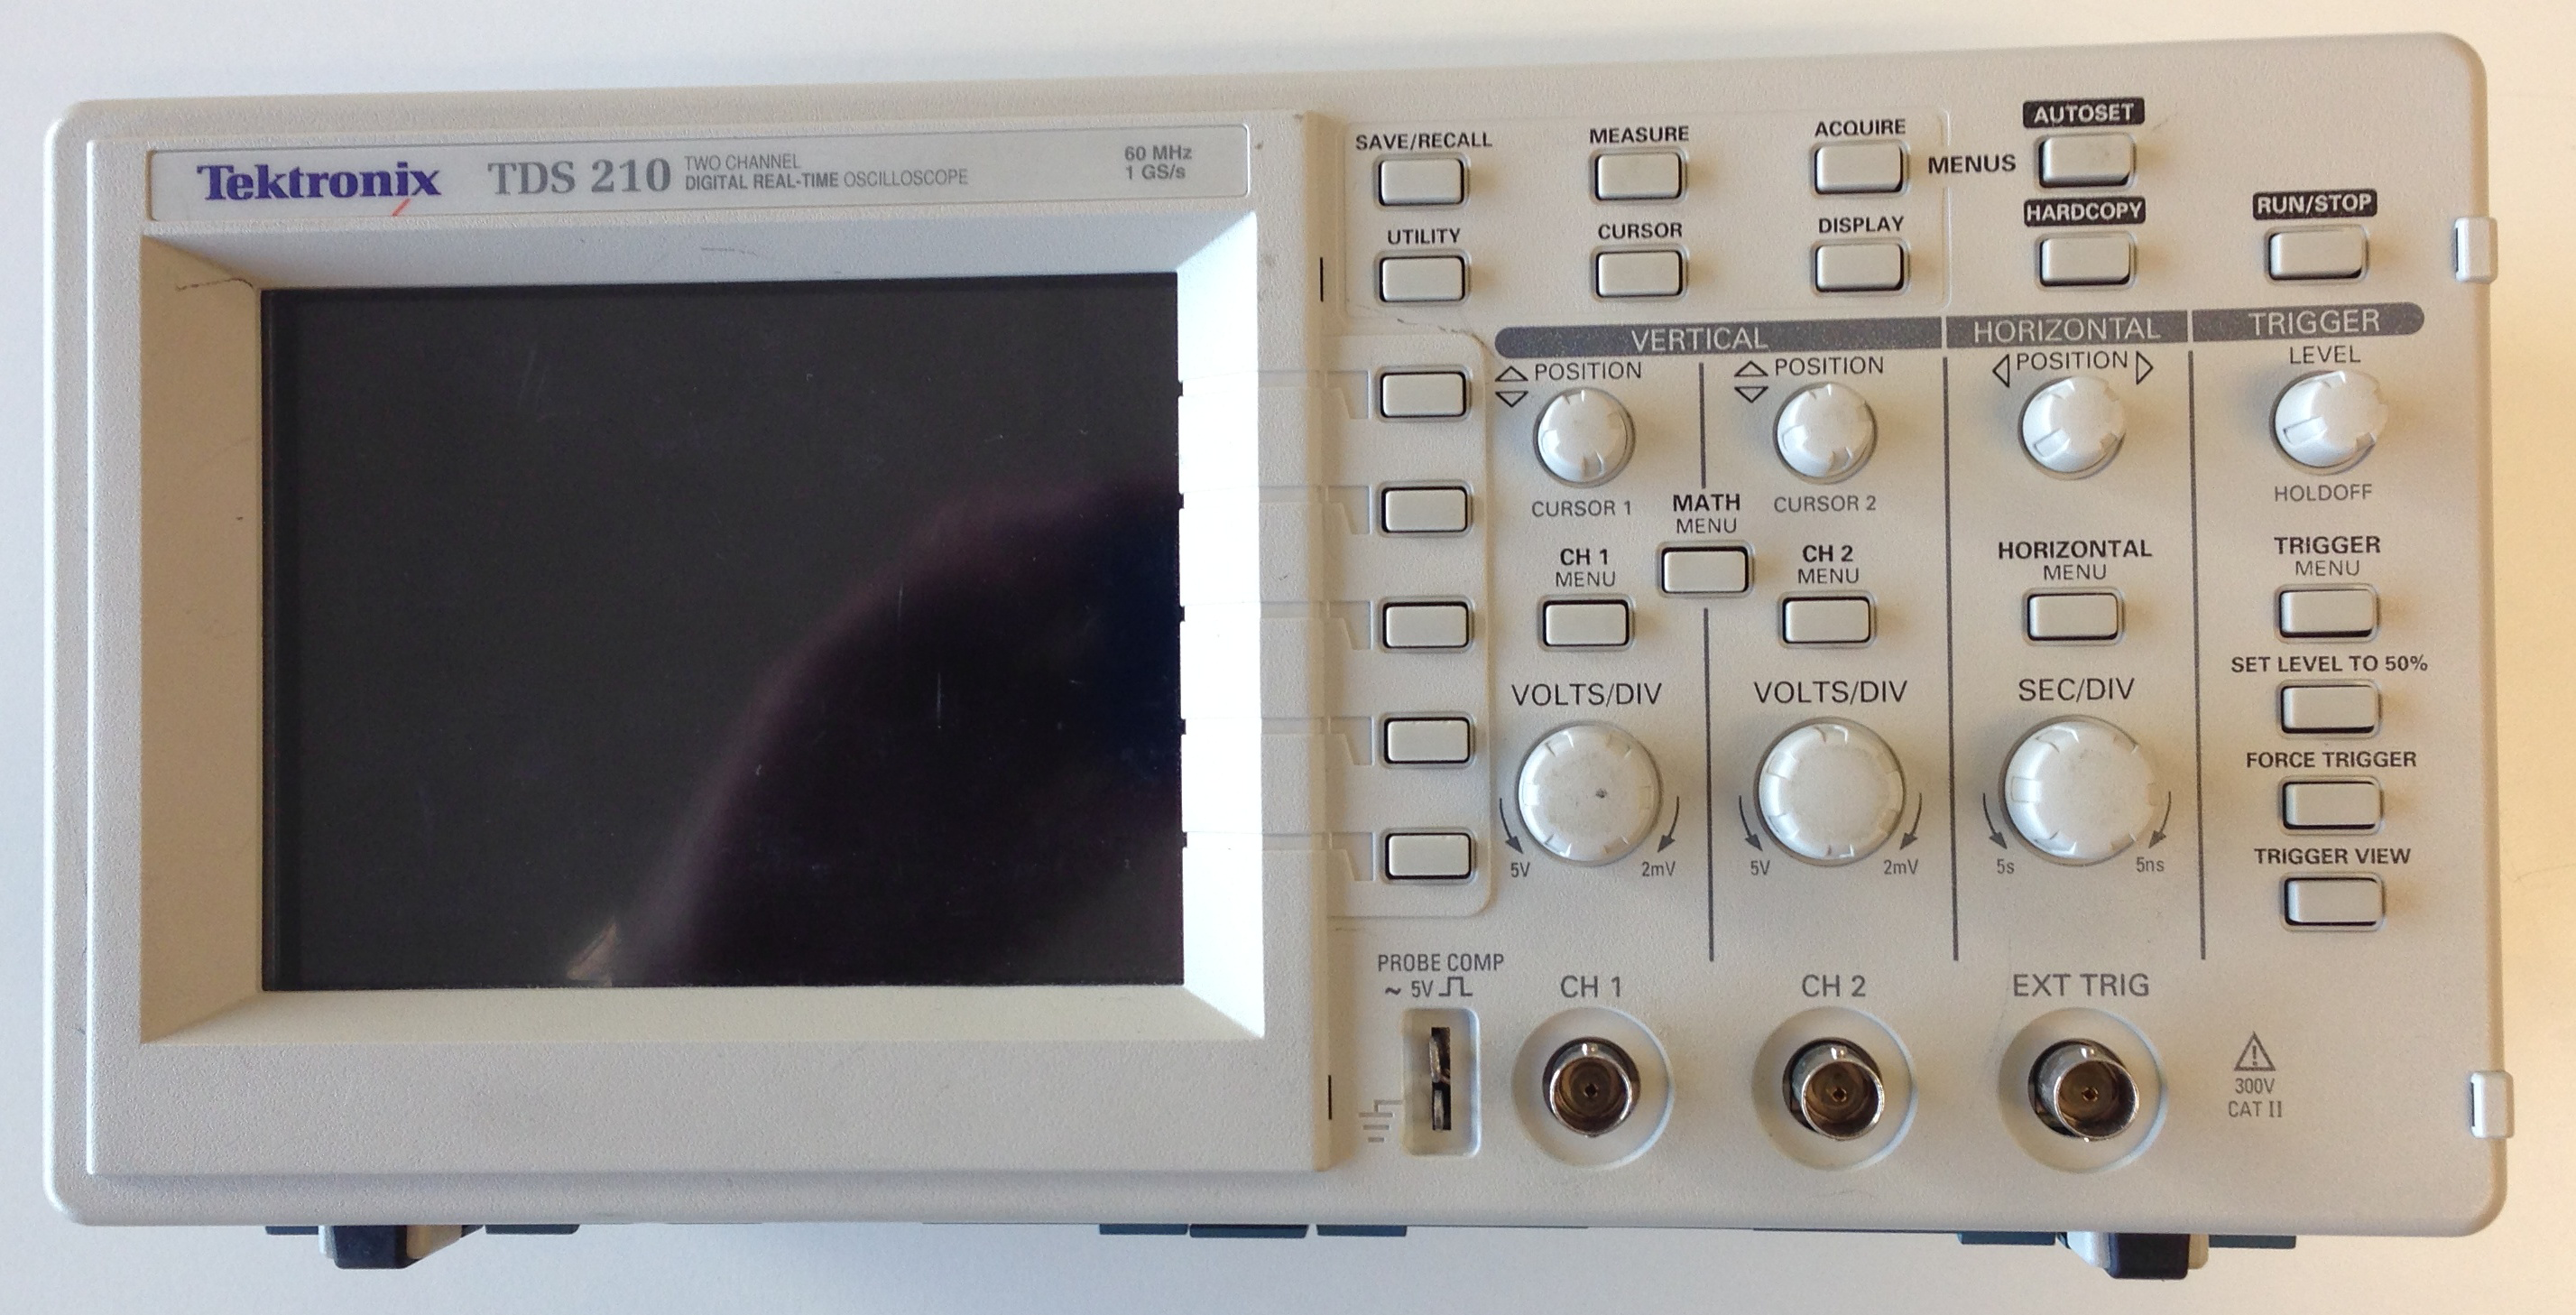 This is an image of the front side of the oscilloscope. It has a screen and various knobs and input channels.